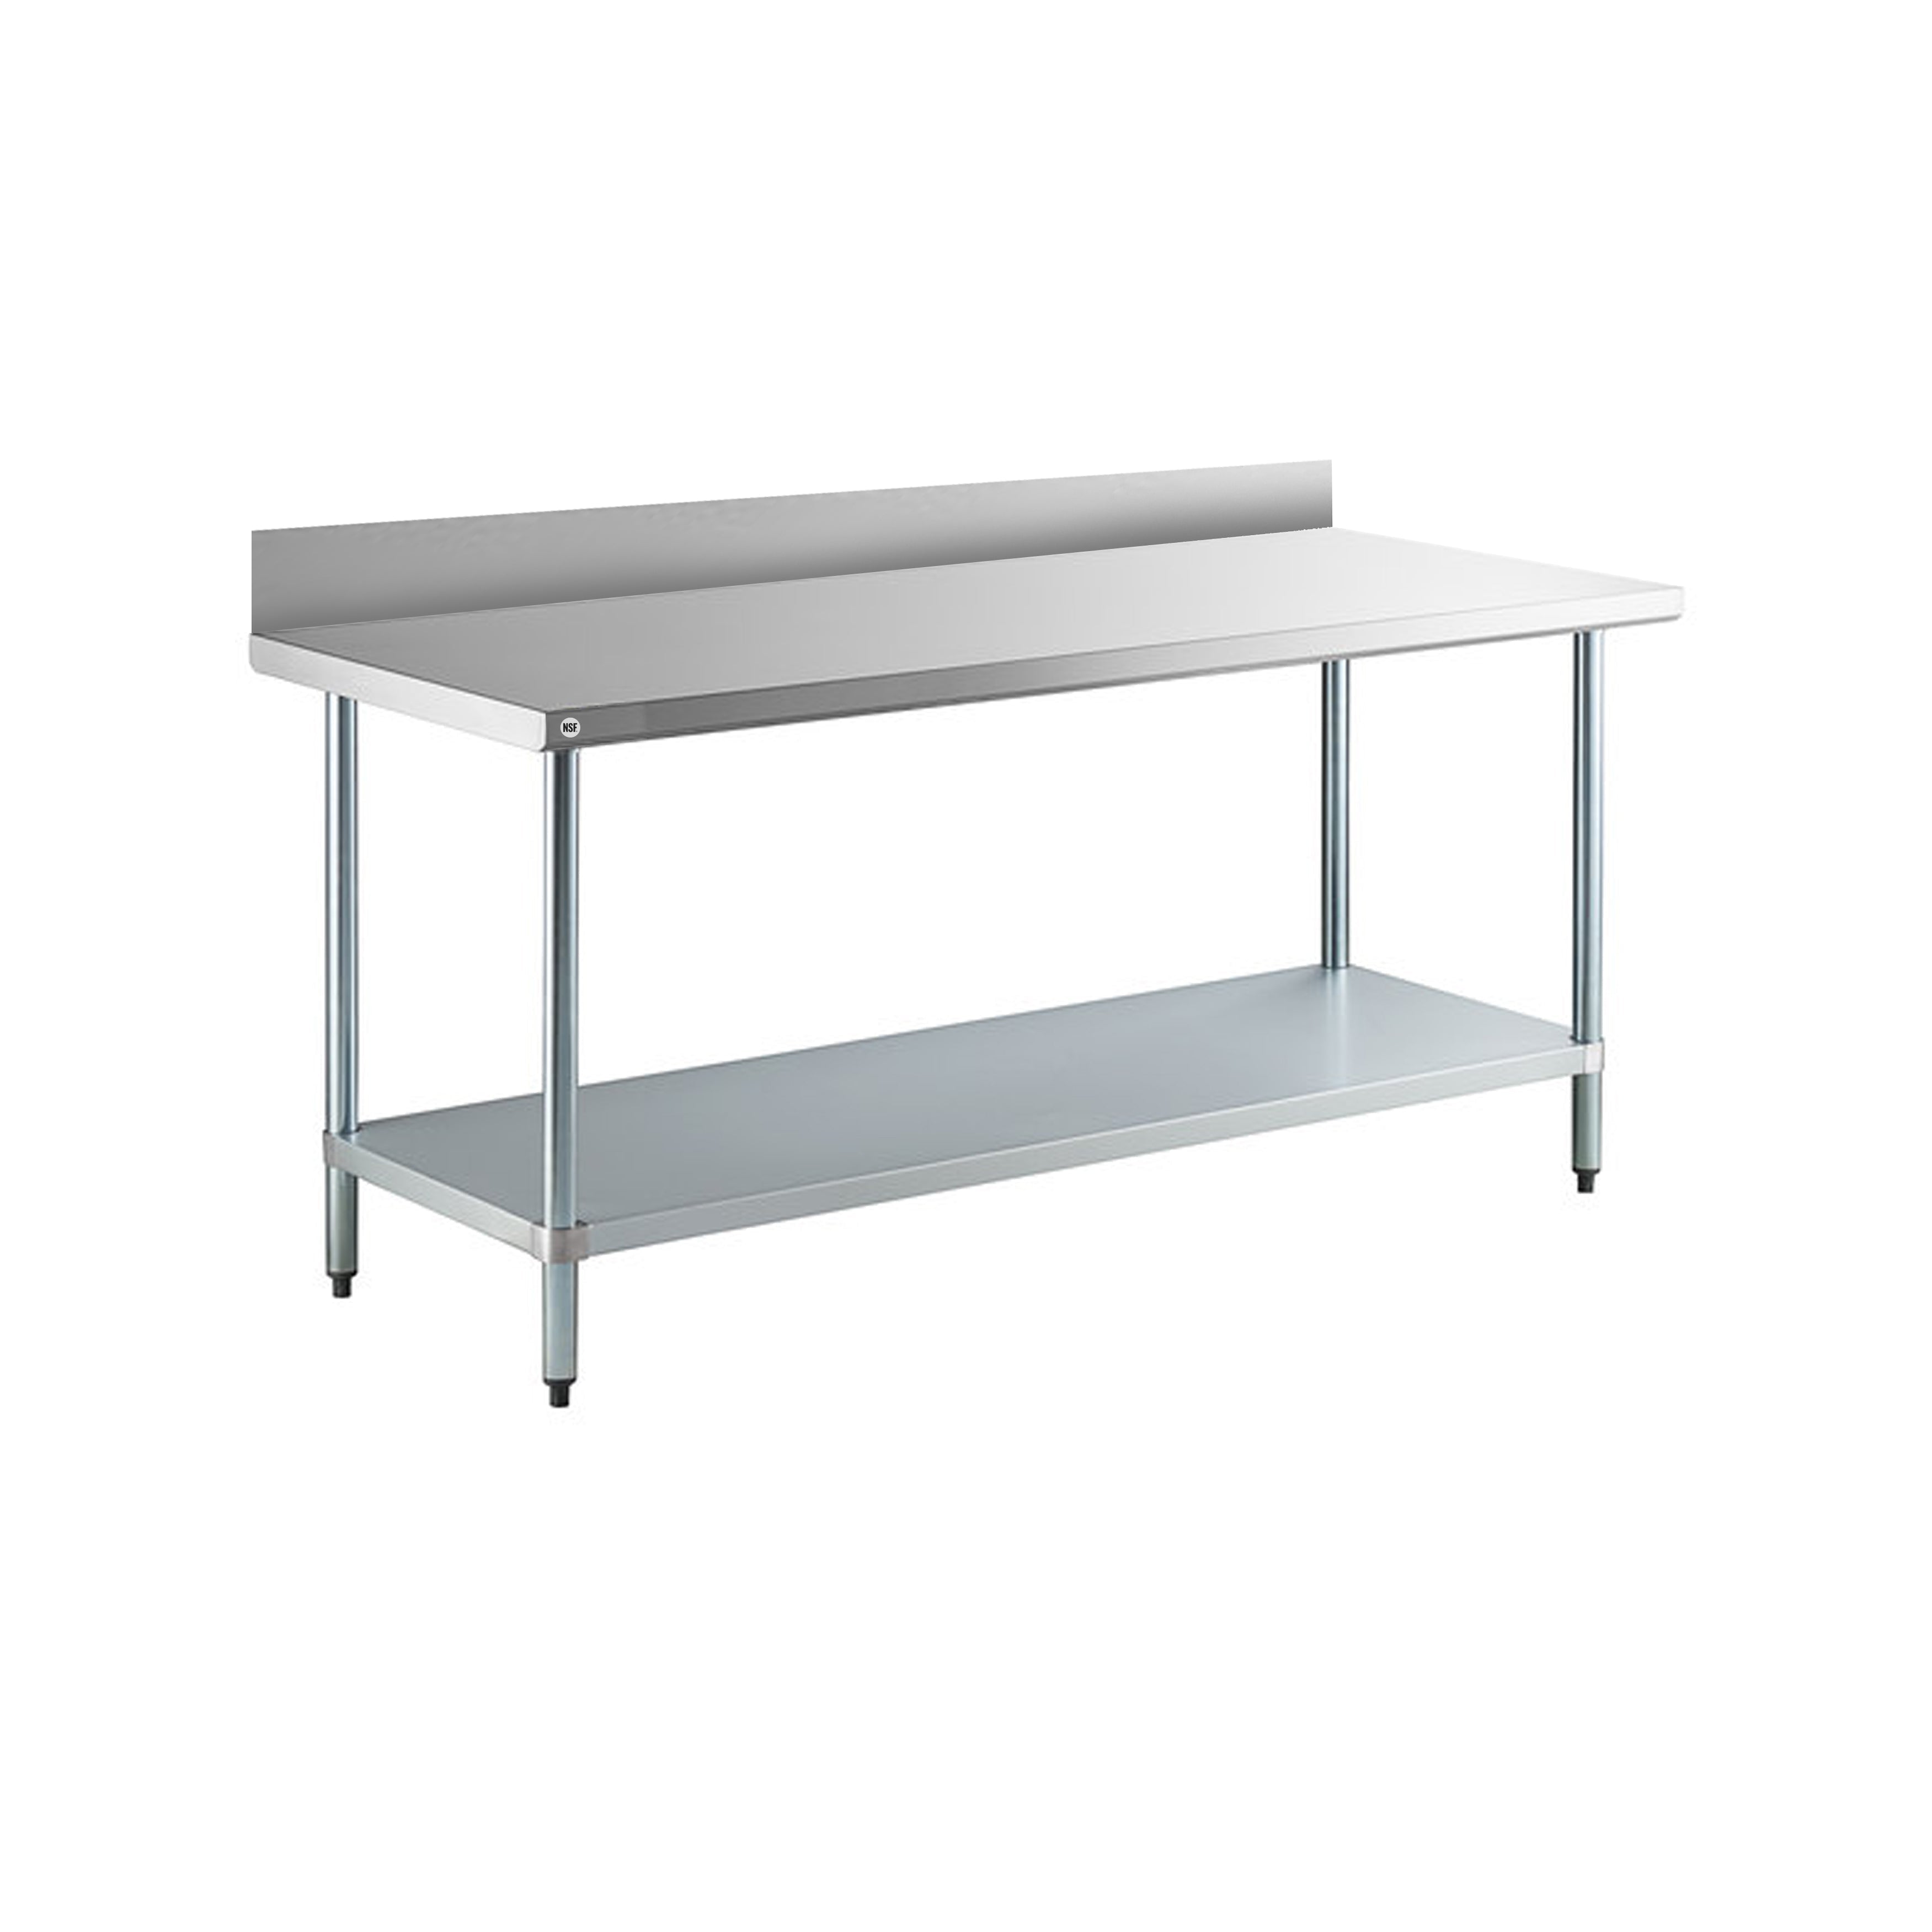 Omcan - 22083, Commercial 24" x 72" Stainless Steel Kitchen Work Table with 4" BackSplash 1200lbs Light Duty